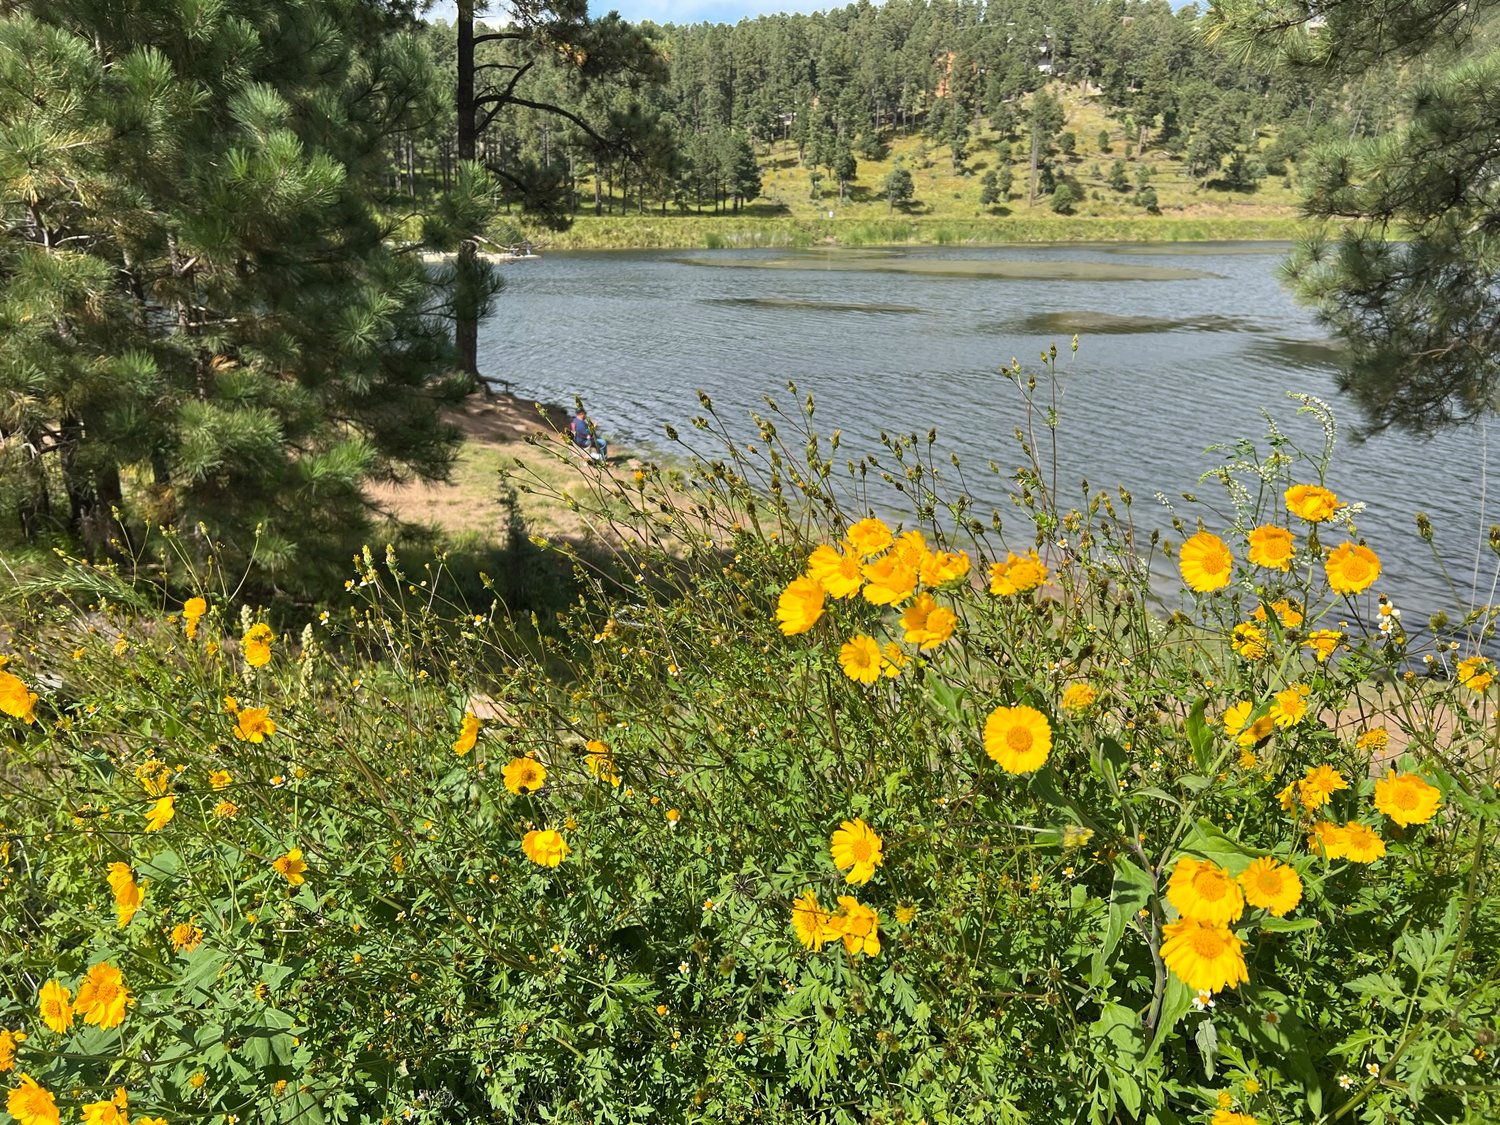 Alto Lake in Lincoln County near Ruidoso can provide a cool respite for those seeking some October relief from the heat of the desert.